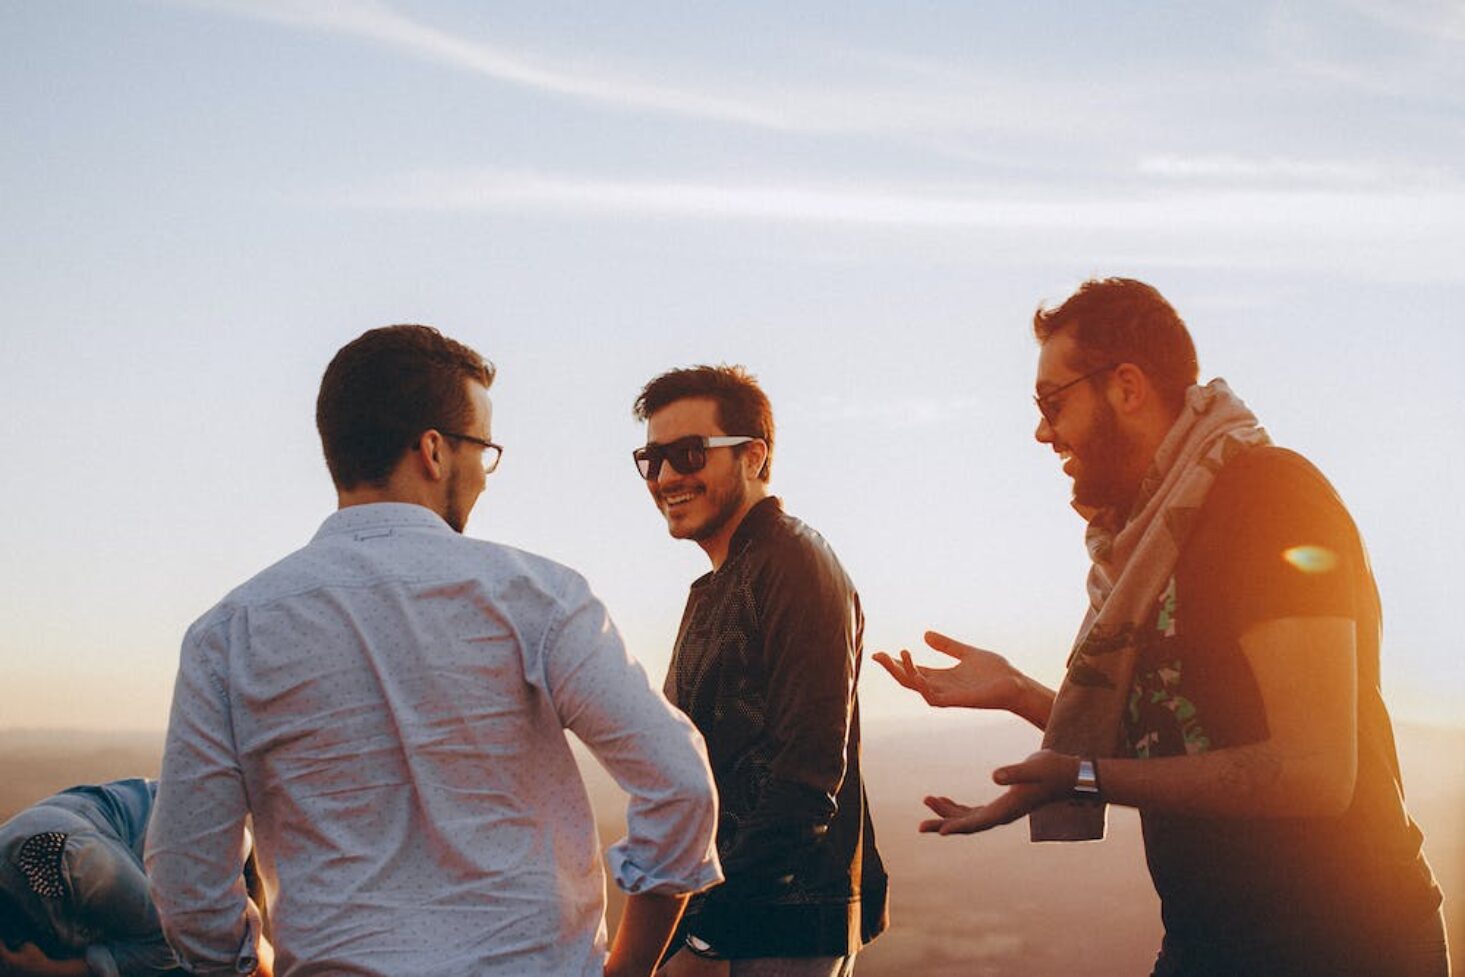 The Best Stag Do Ideas for Celebrating Friendship